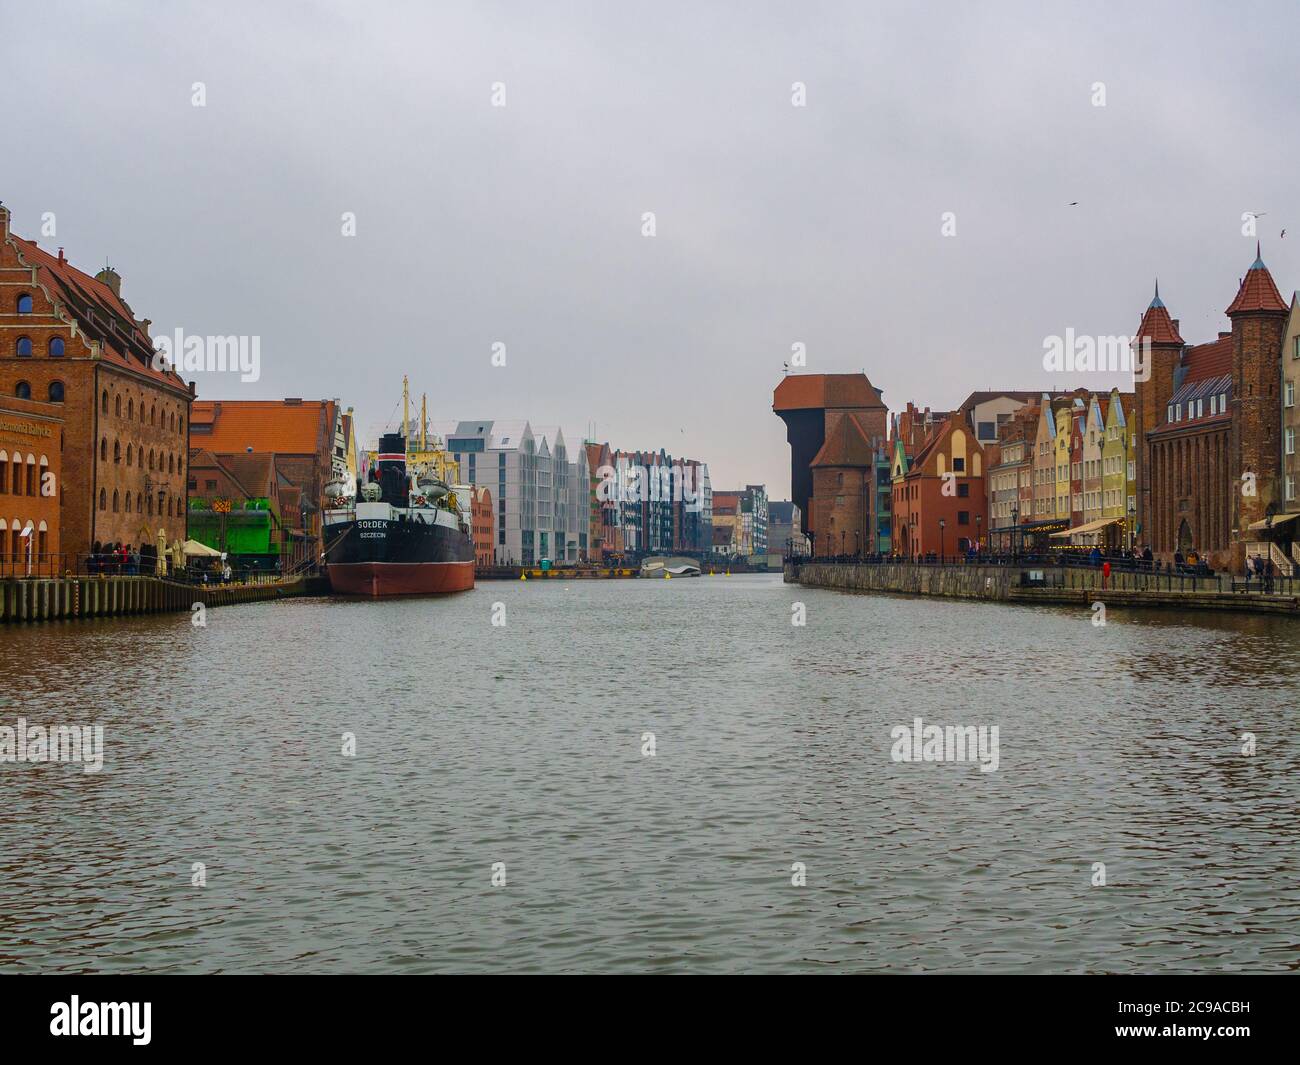 Gdansk old town. View of the Motława waterfront. Shot from the Green Bridge in Gdańsk. Stock Photo